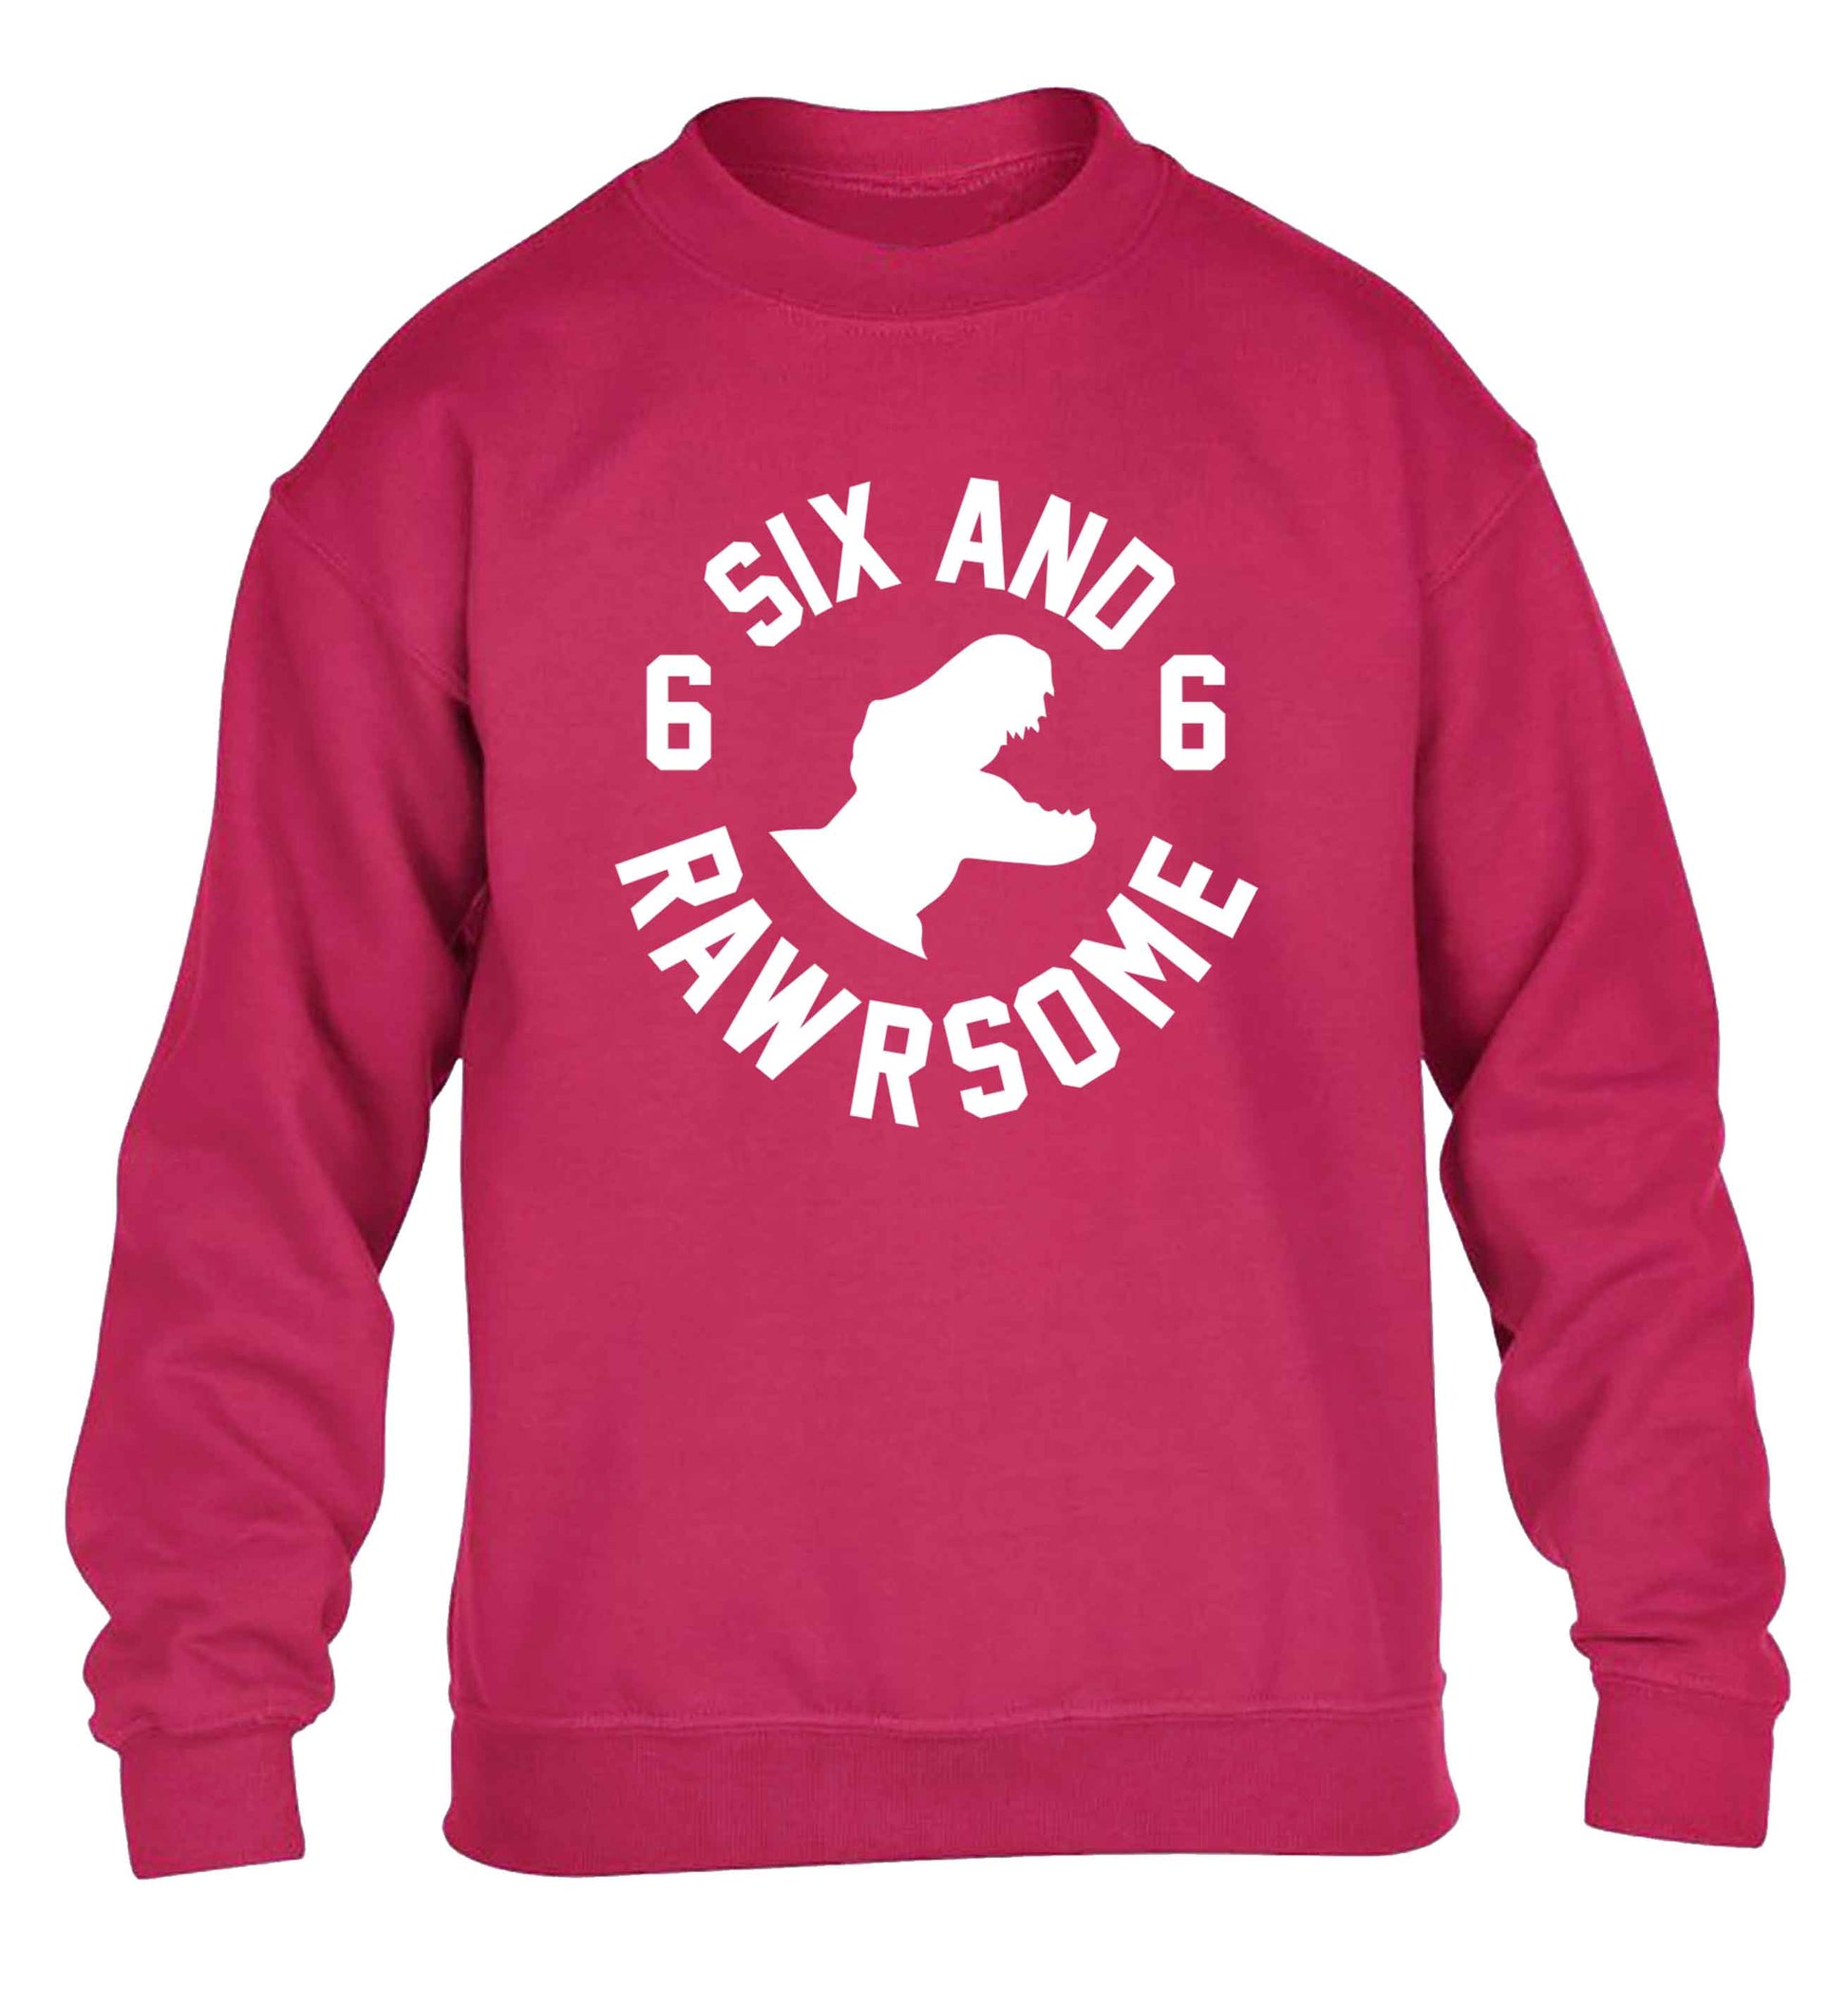 Six and rawrsome children's pink sweater 12-13 Years